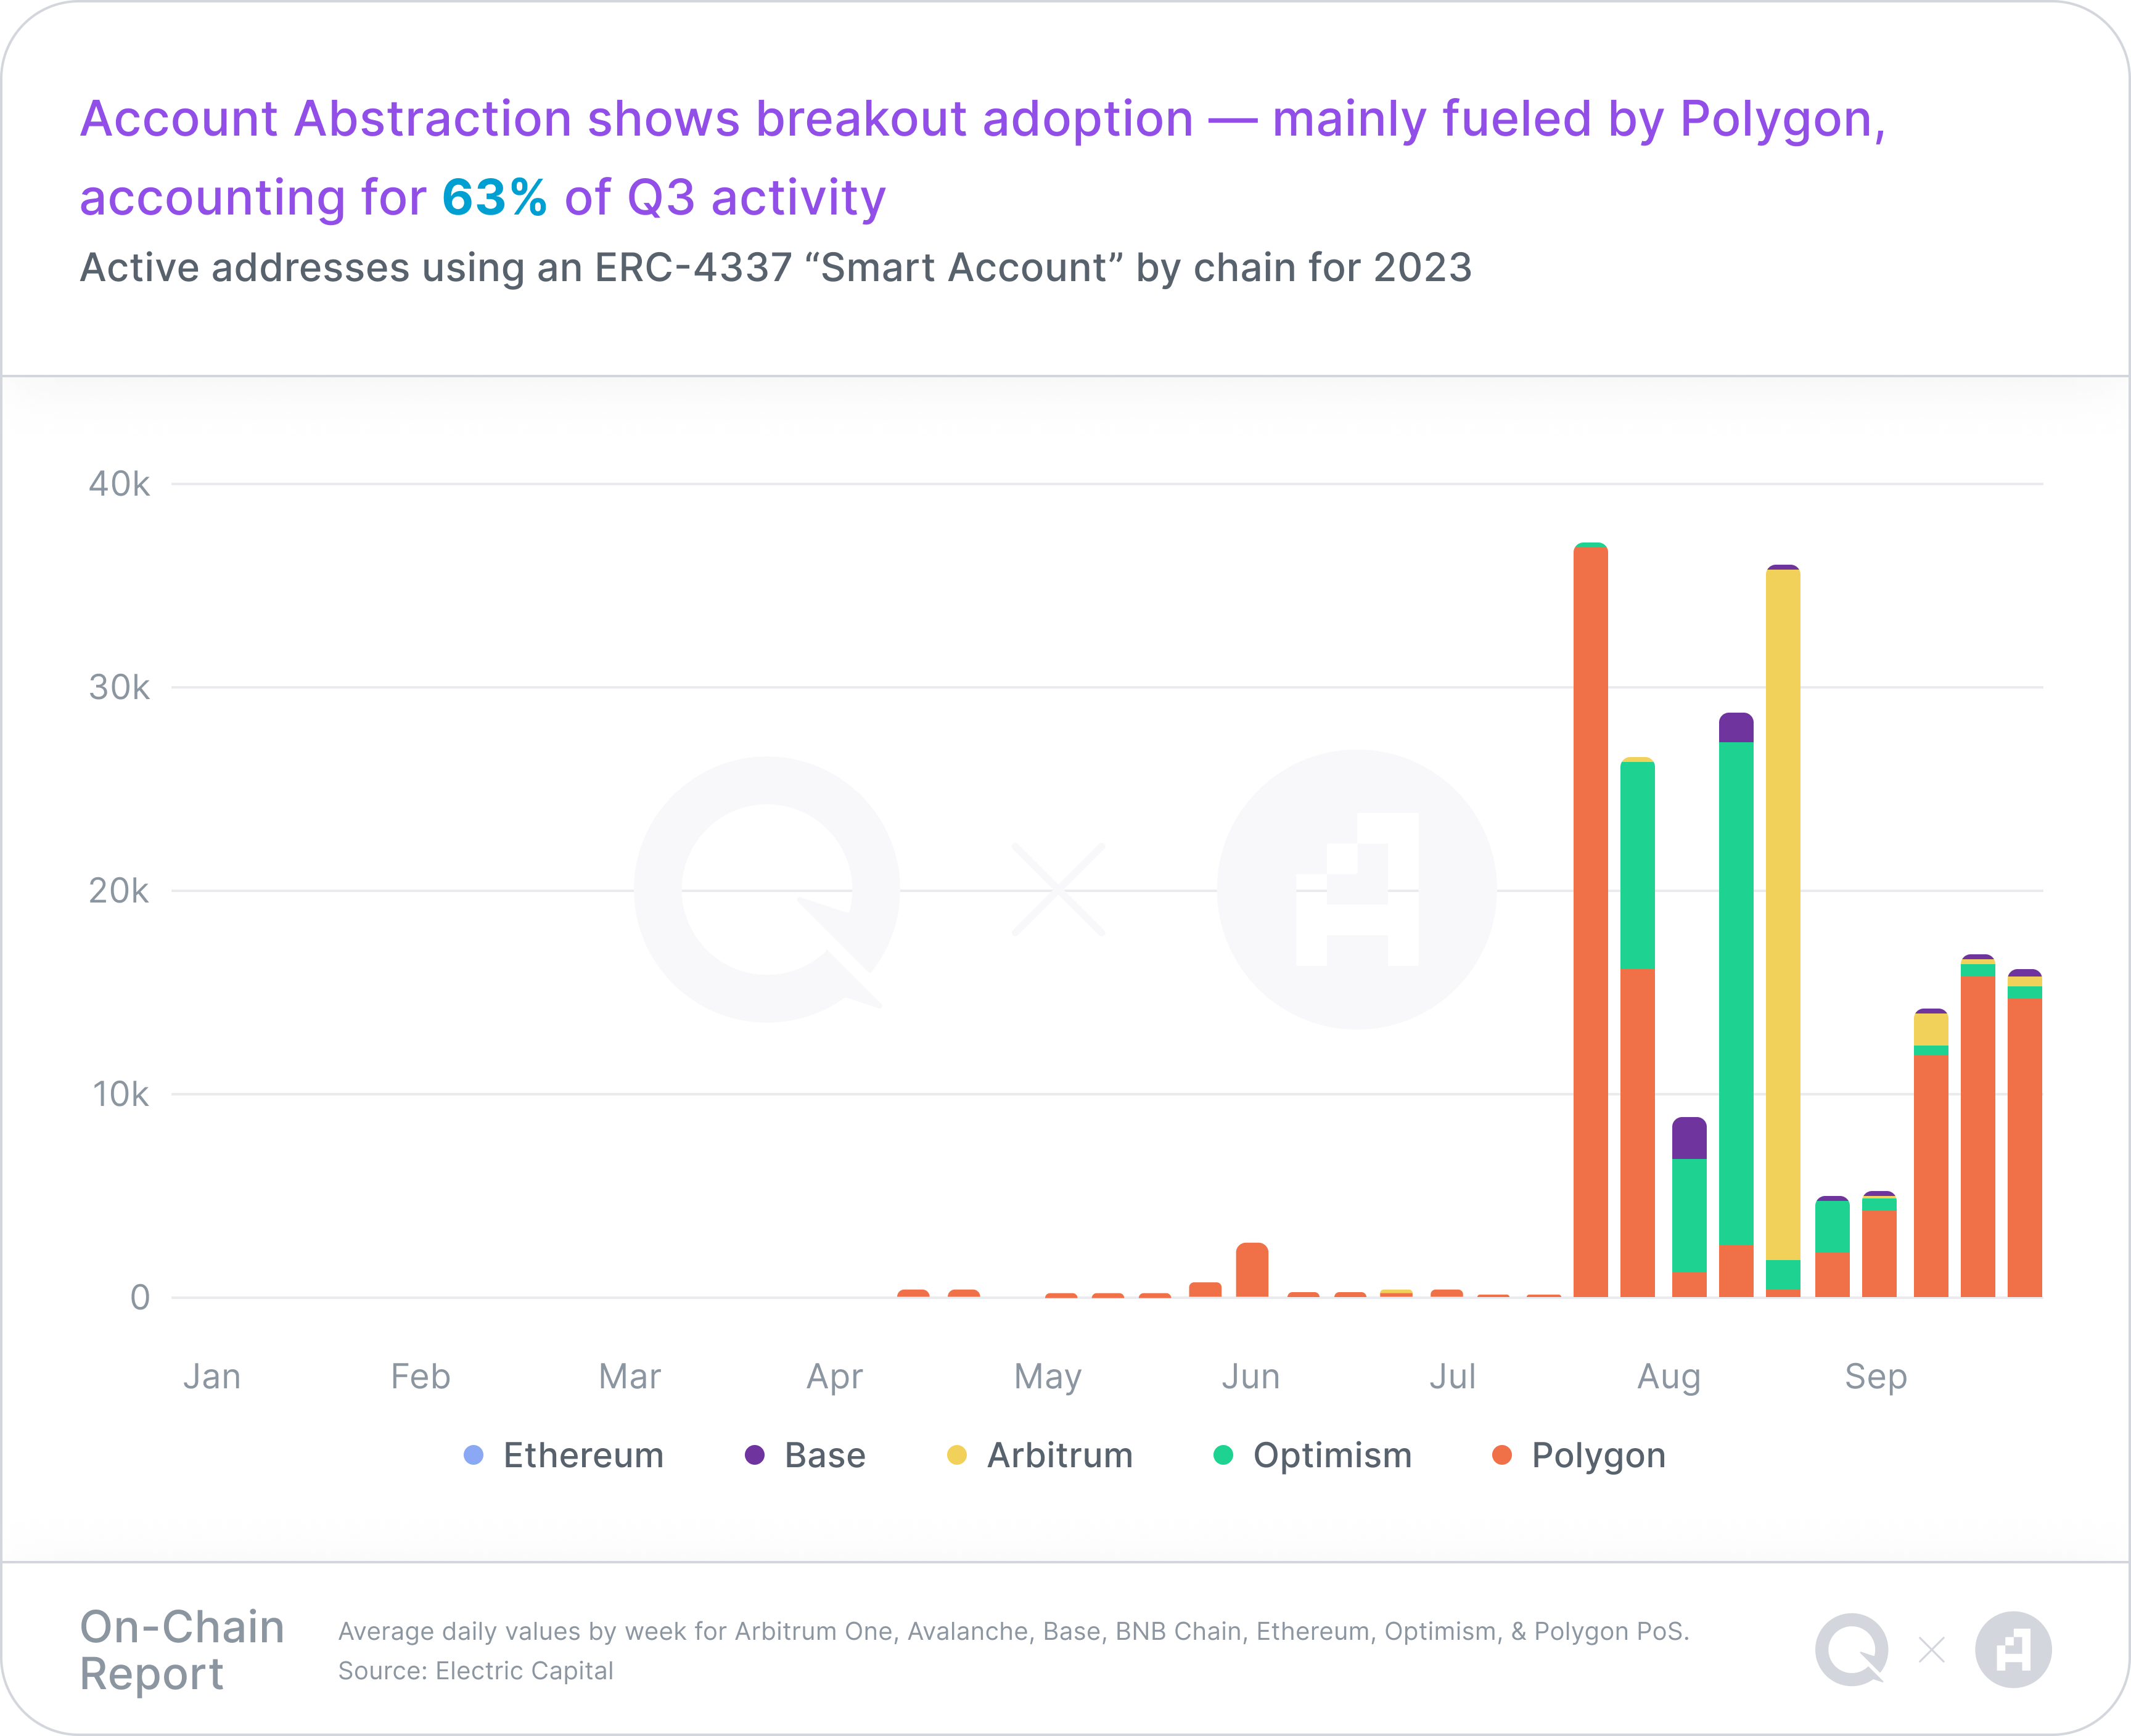 A chart representing Active addresses using an ERC-4337 “Smart Account” by chain for 2023, with a takeaway headline of "Account Abstraction shows breakout adoption — mainly fueled by Polygon, accounting for 63% of Q3 activity"